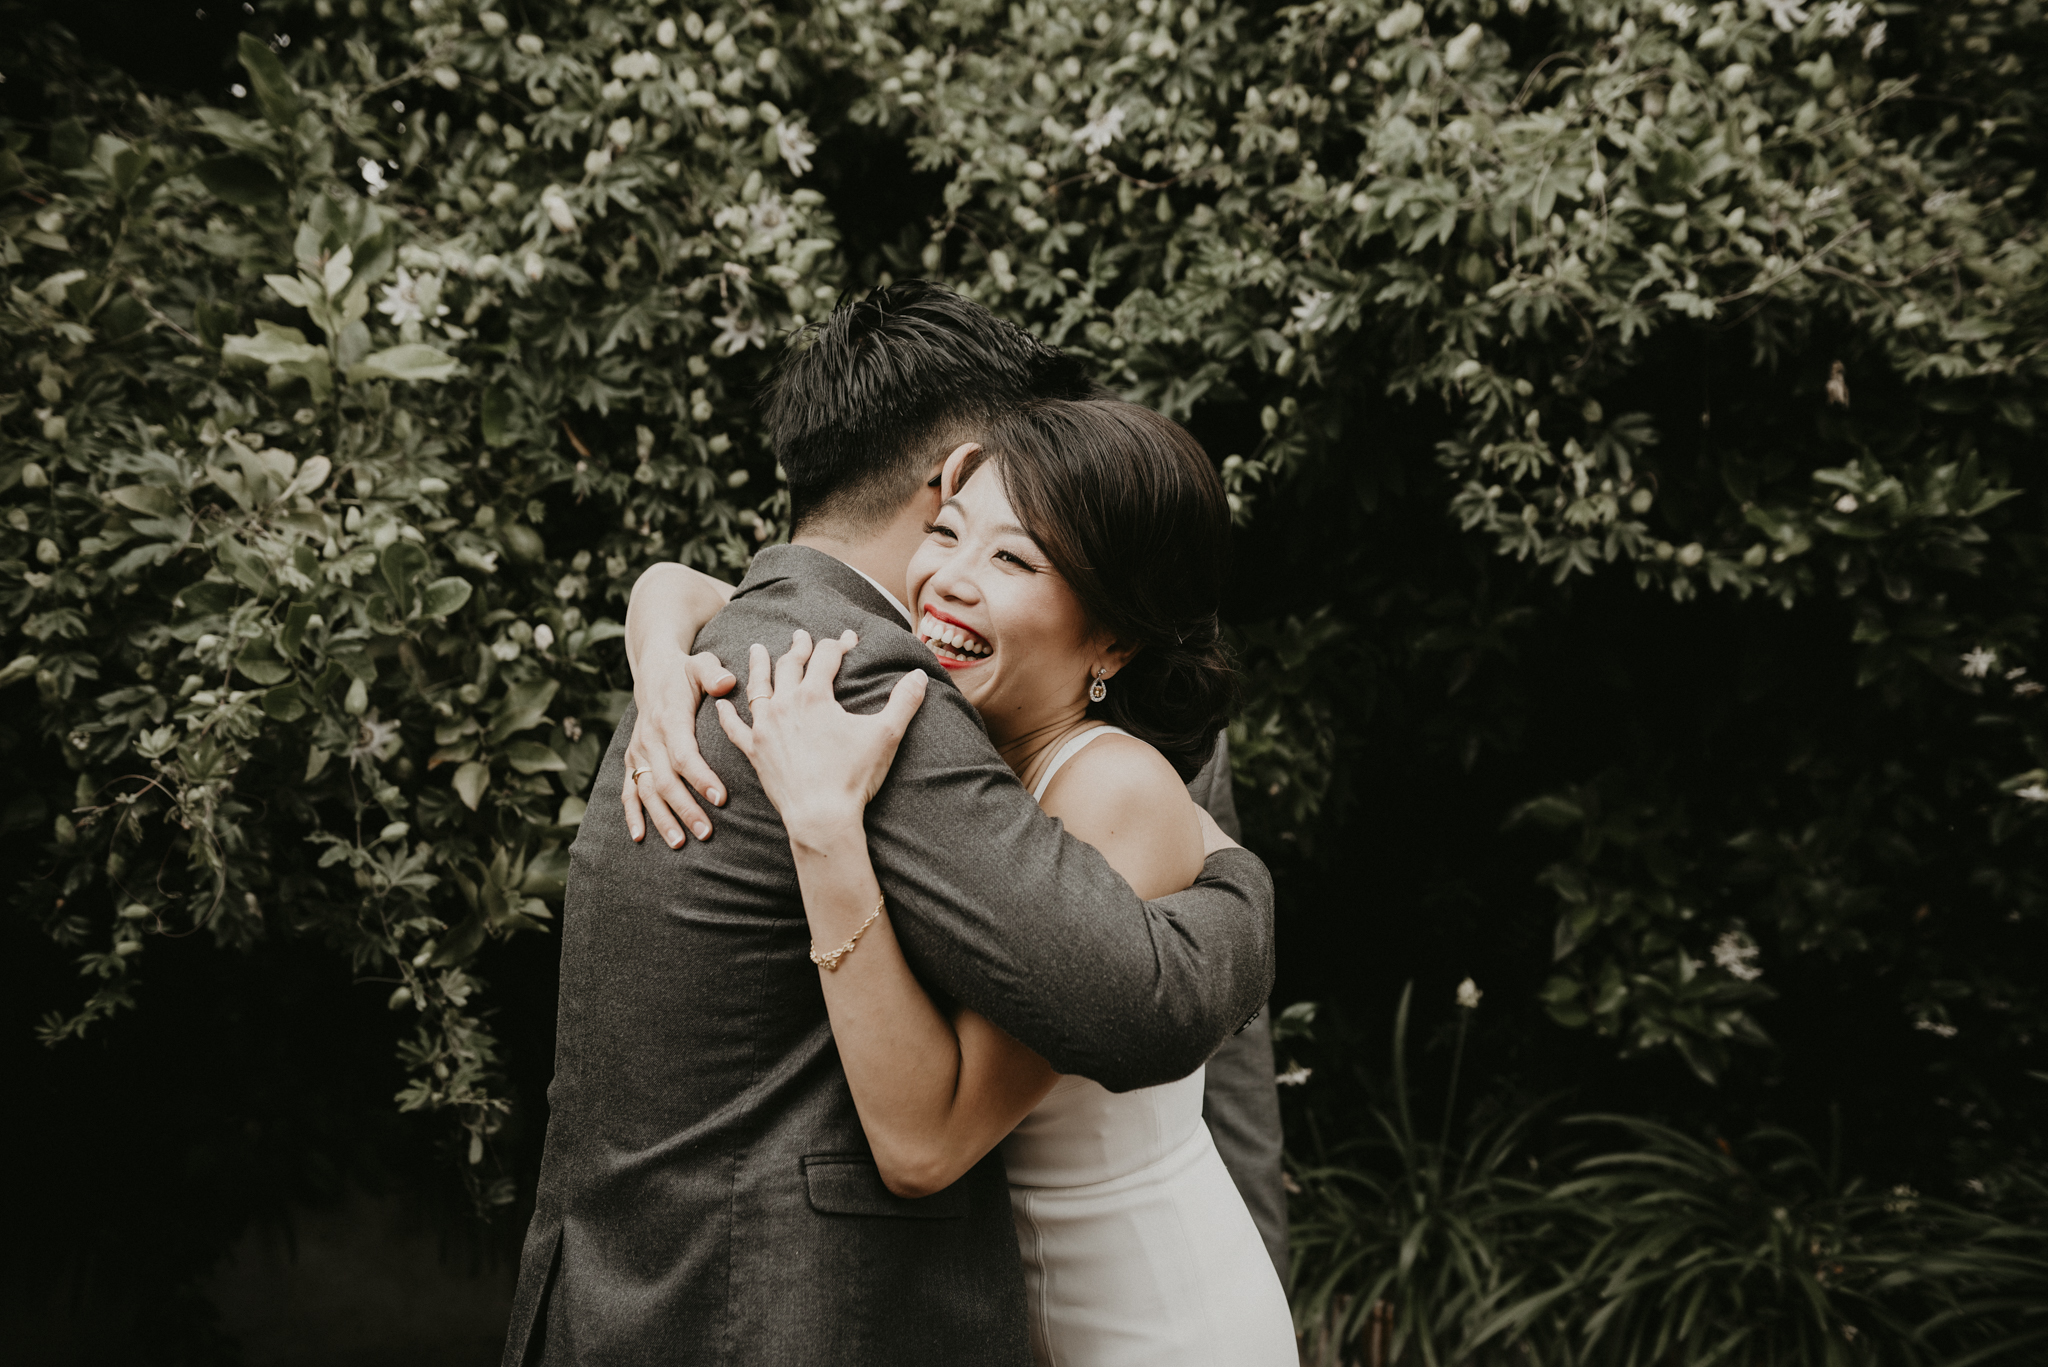 agnes-duy-15th-december-2018-chinese-vietnamese-wedding-tea-ceremony-yarraville-home-house-documentary-candid-photographer-sarah-matler-photography-82